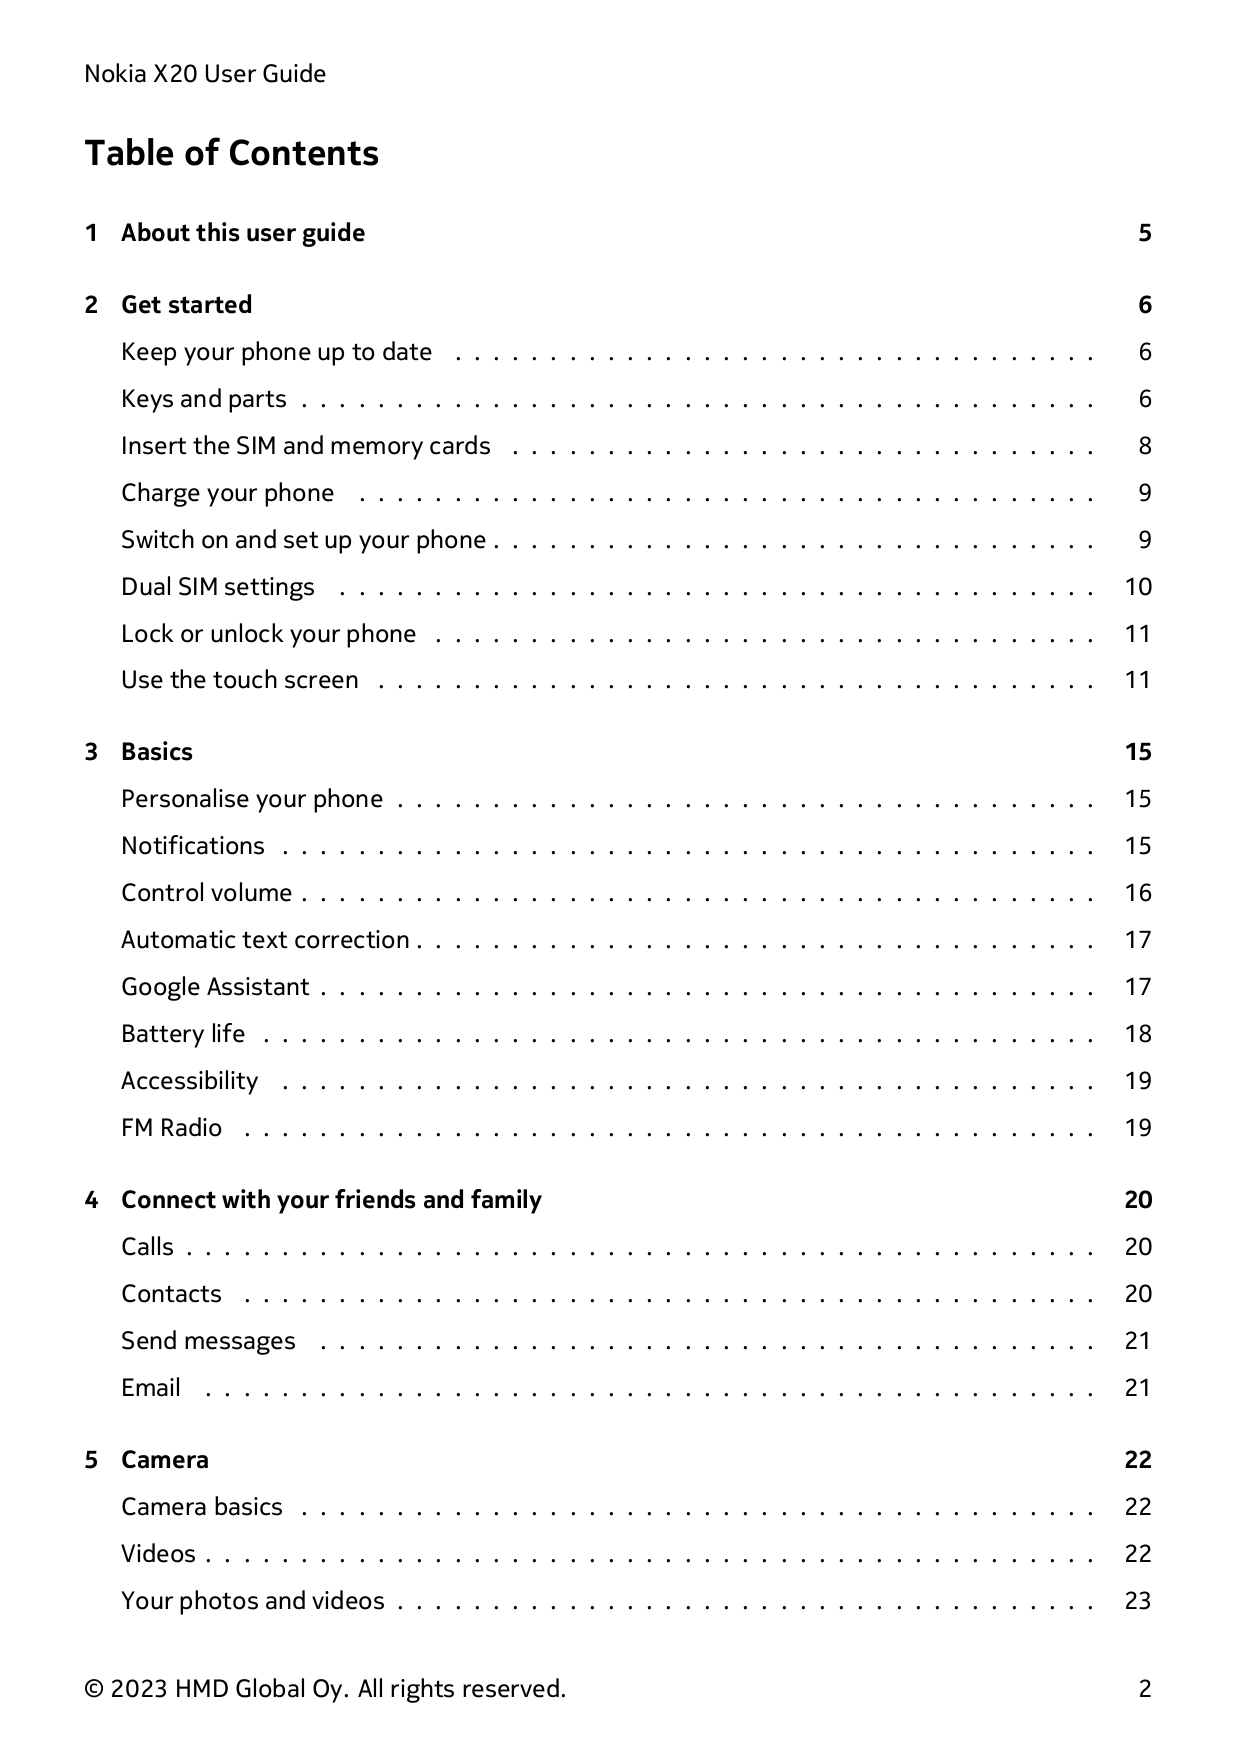 Nokia X20 User GuideTable of Contents1 About this user guide52 Get started6Keep your phone up to date . . . . . . . . . . . . . 